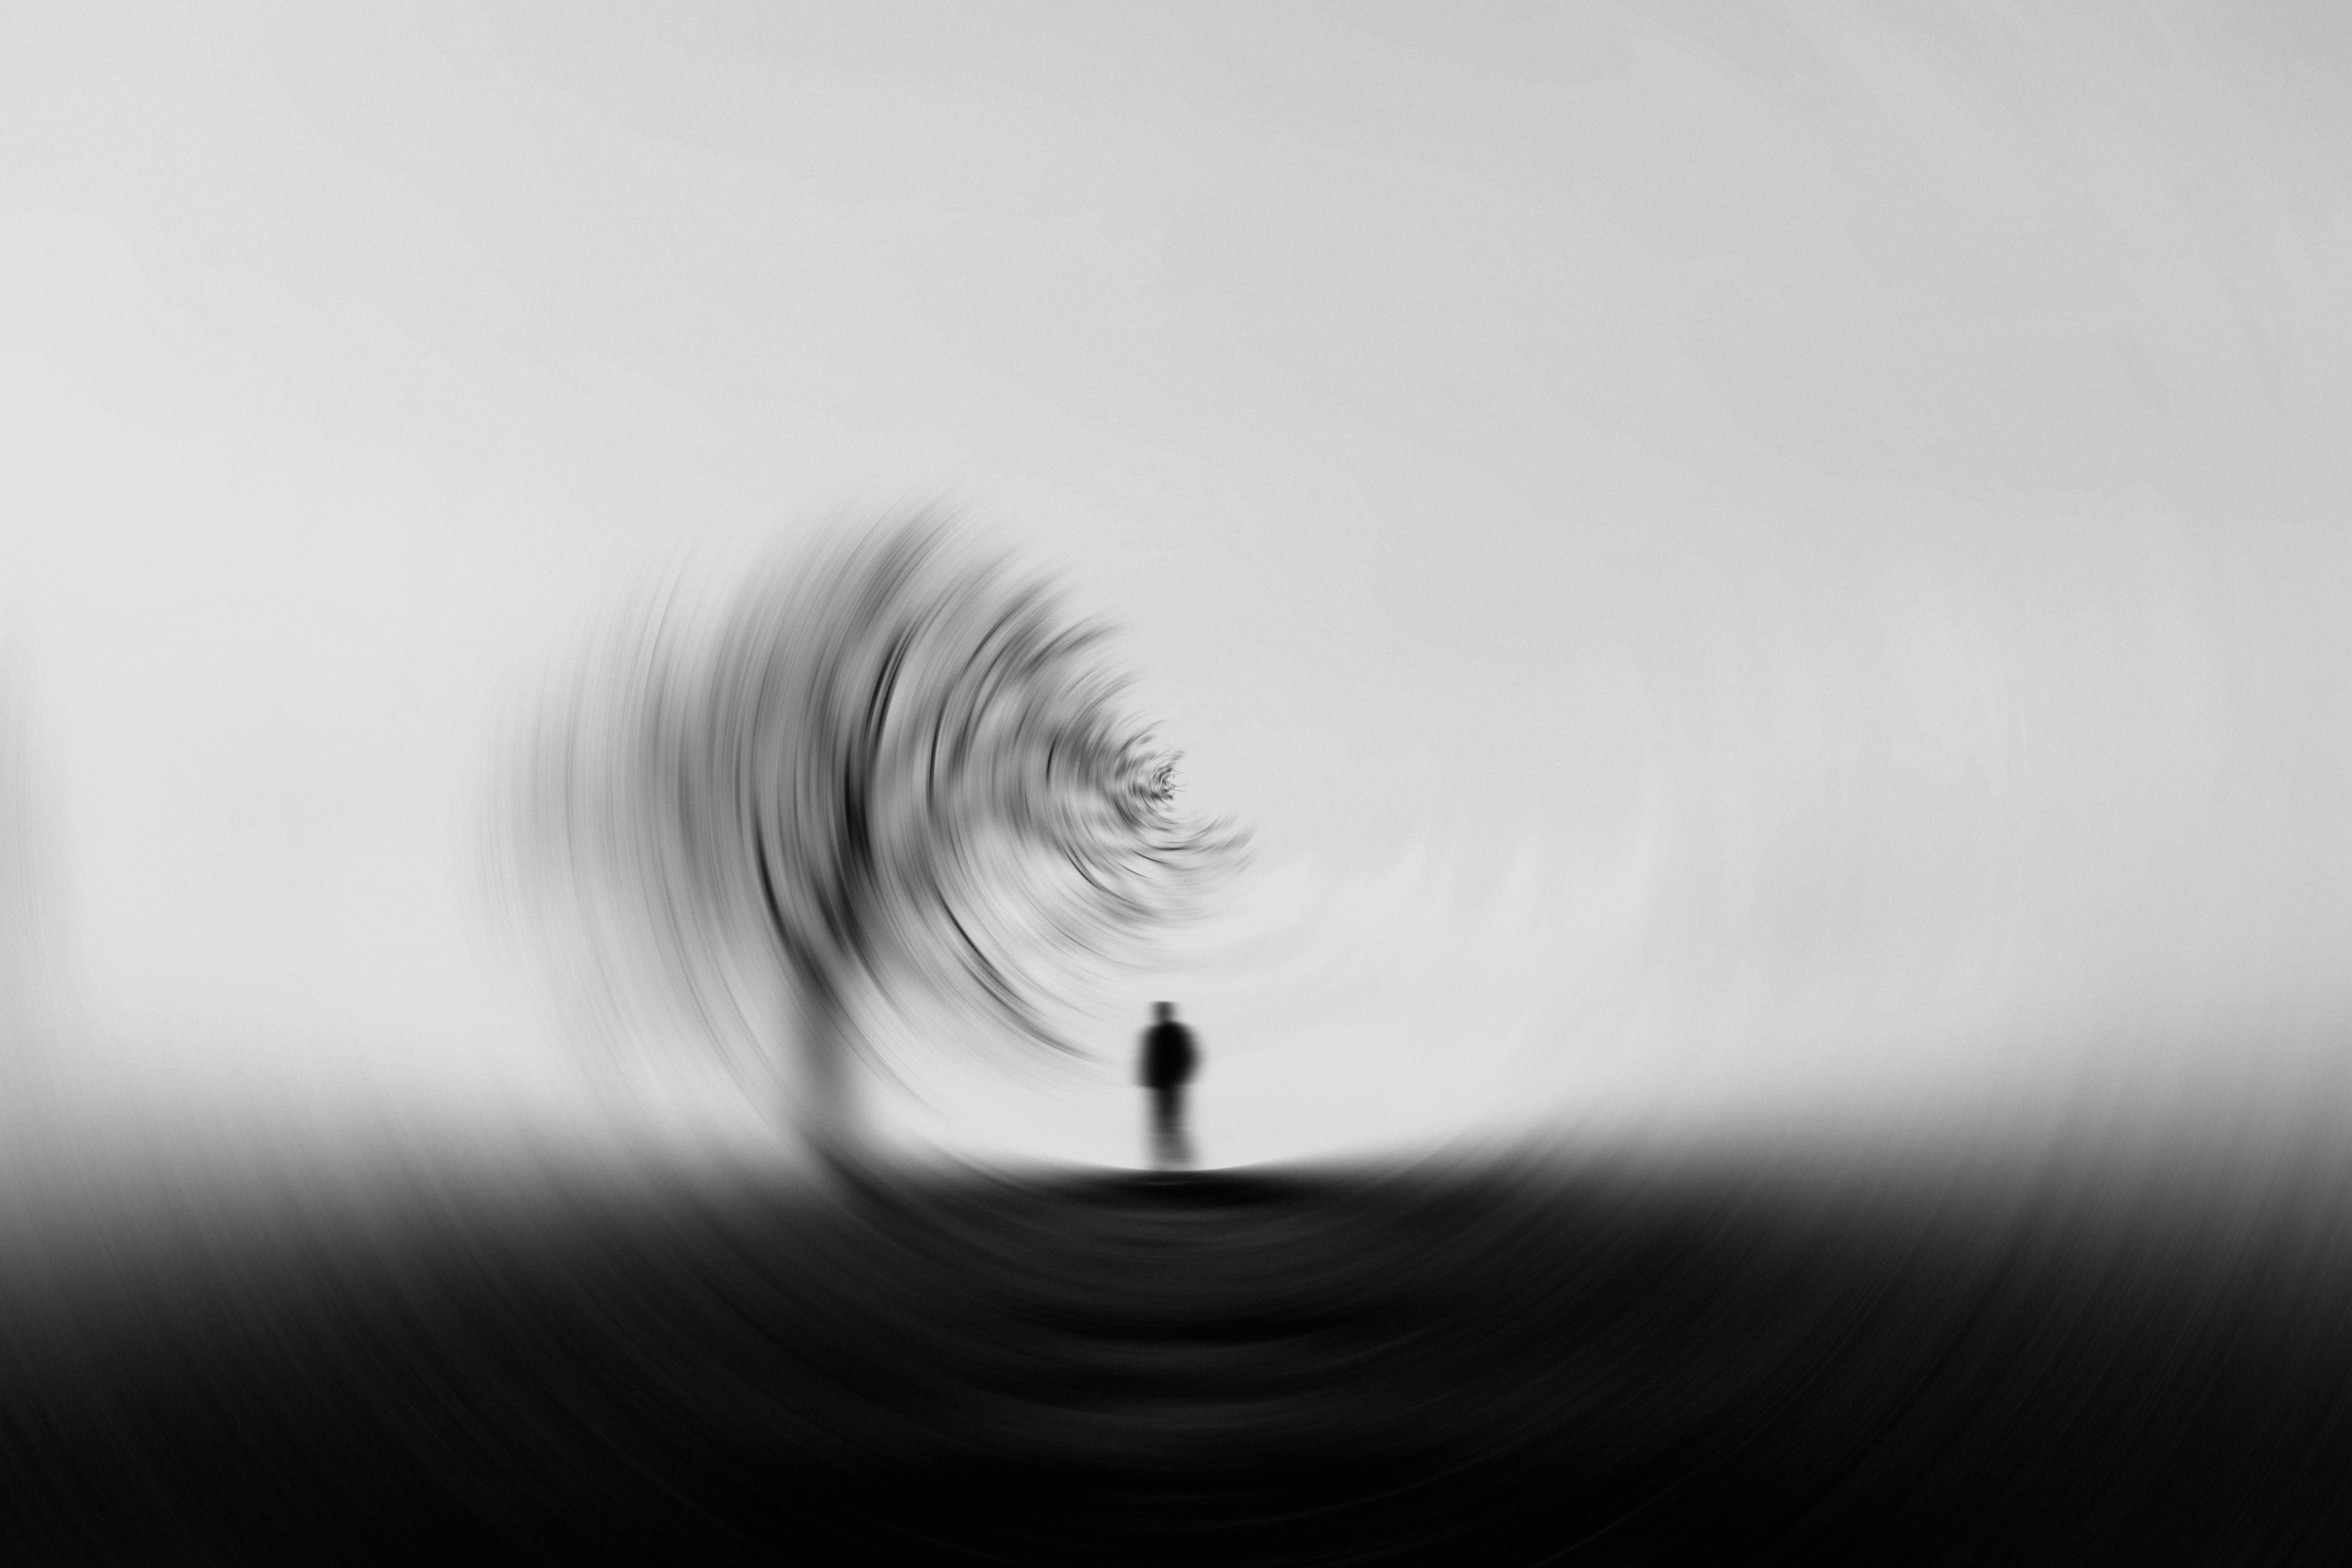 silhouette, miscellanea, miscellaneous, wood, tree, blur, smooth, bw, chb, effect